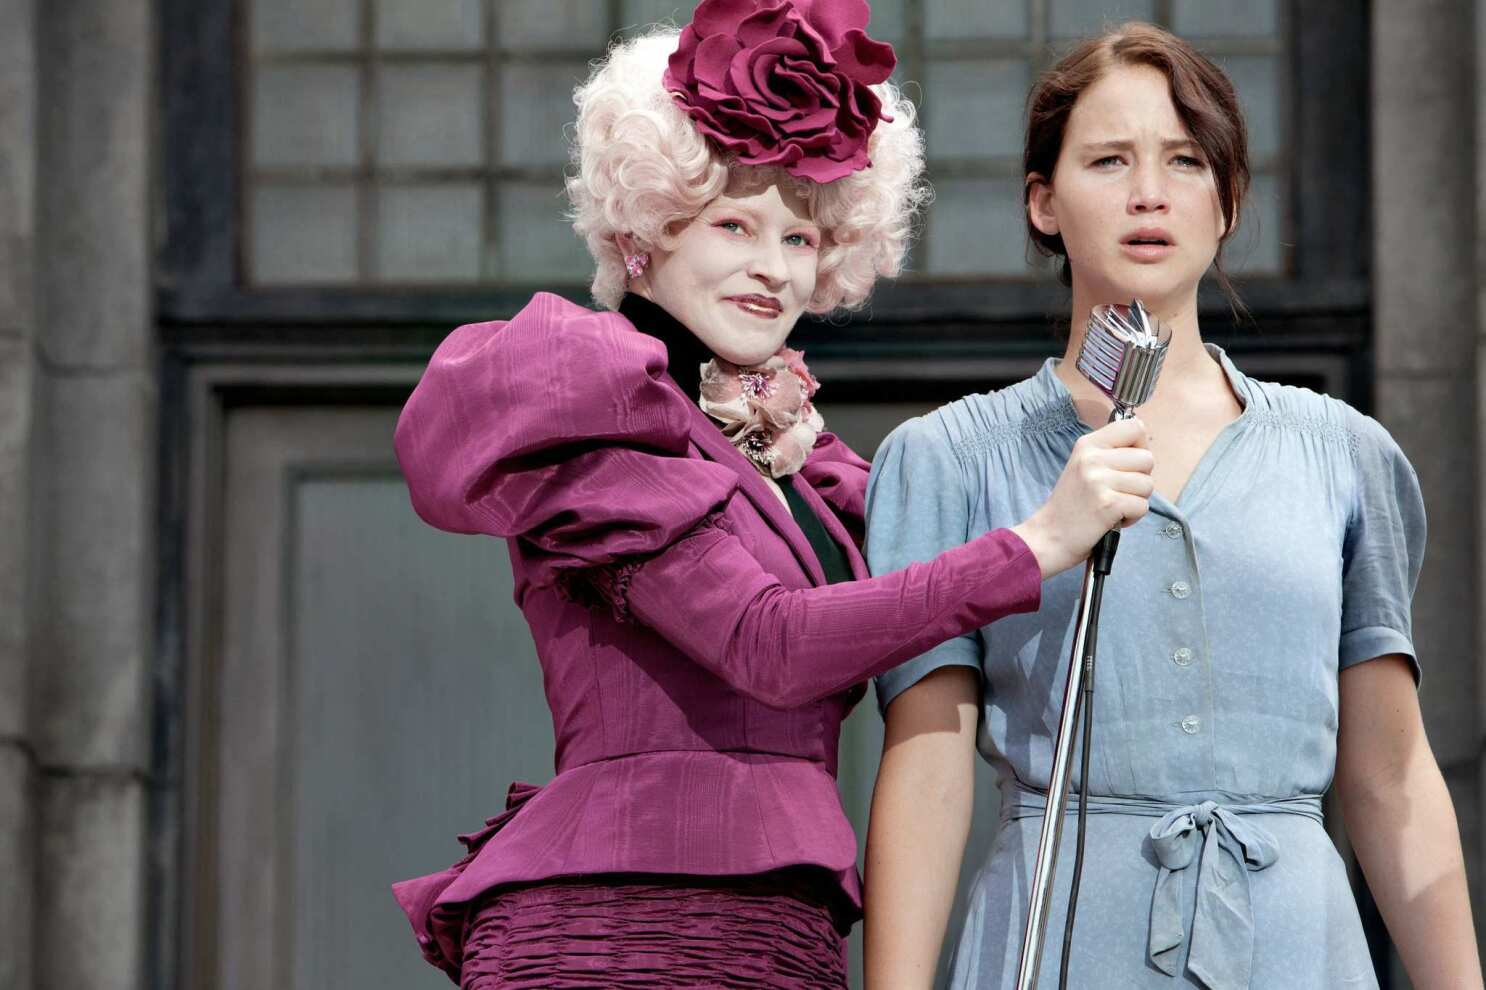 Hunger Games' fashion comes to fiery life - Los Angeles Times